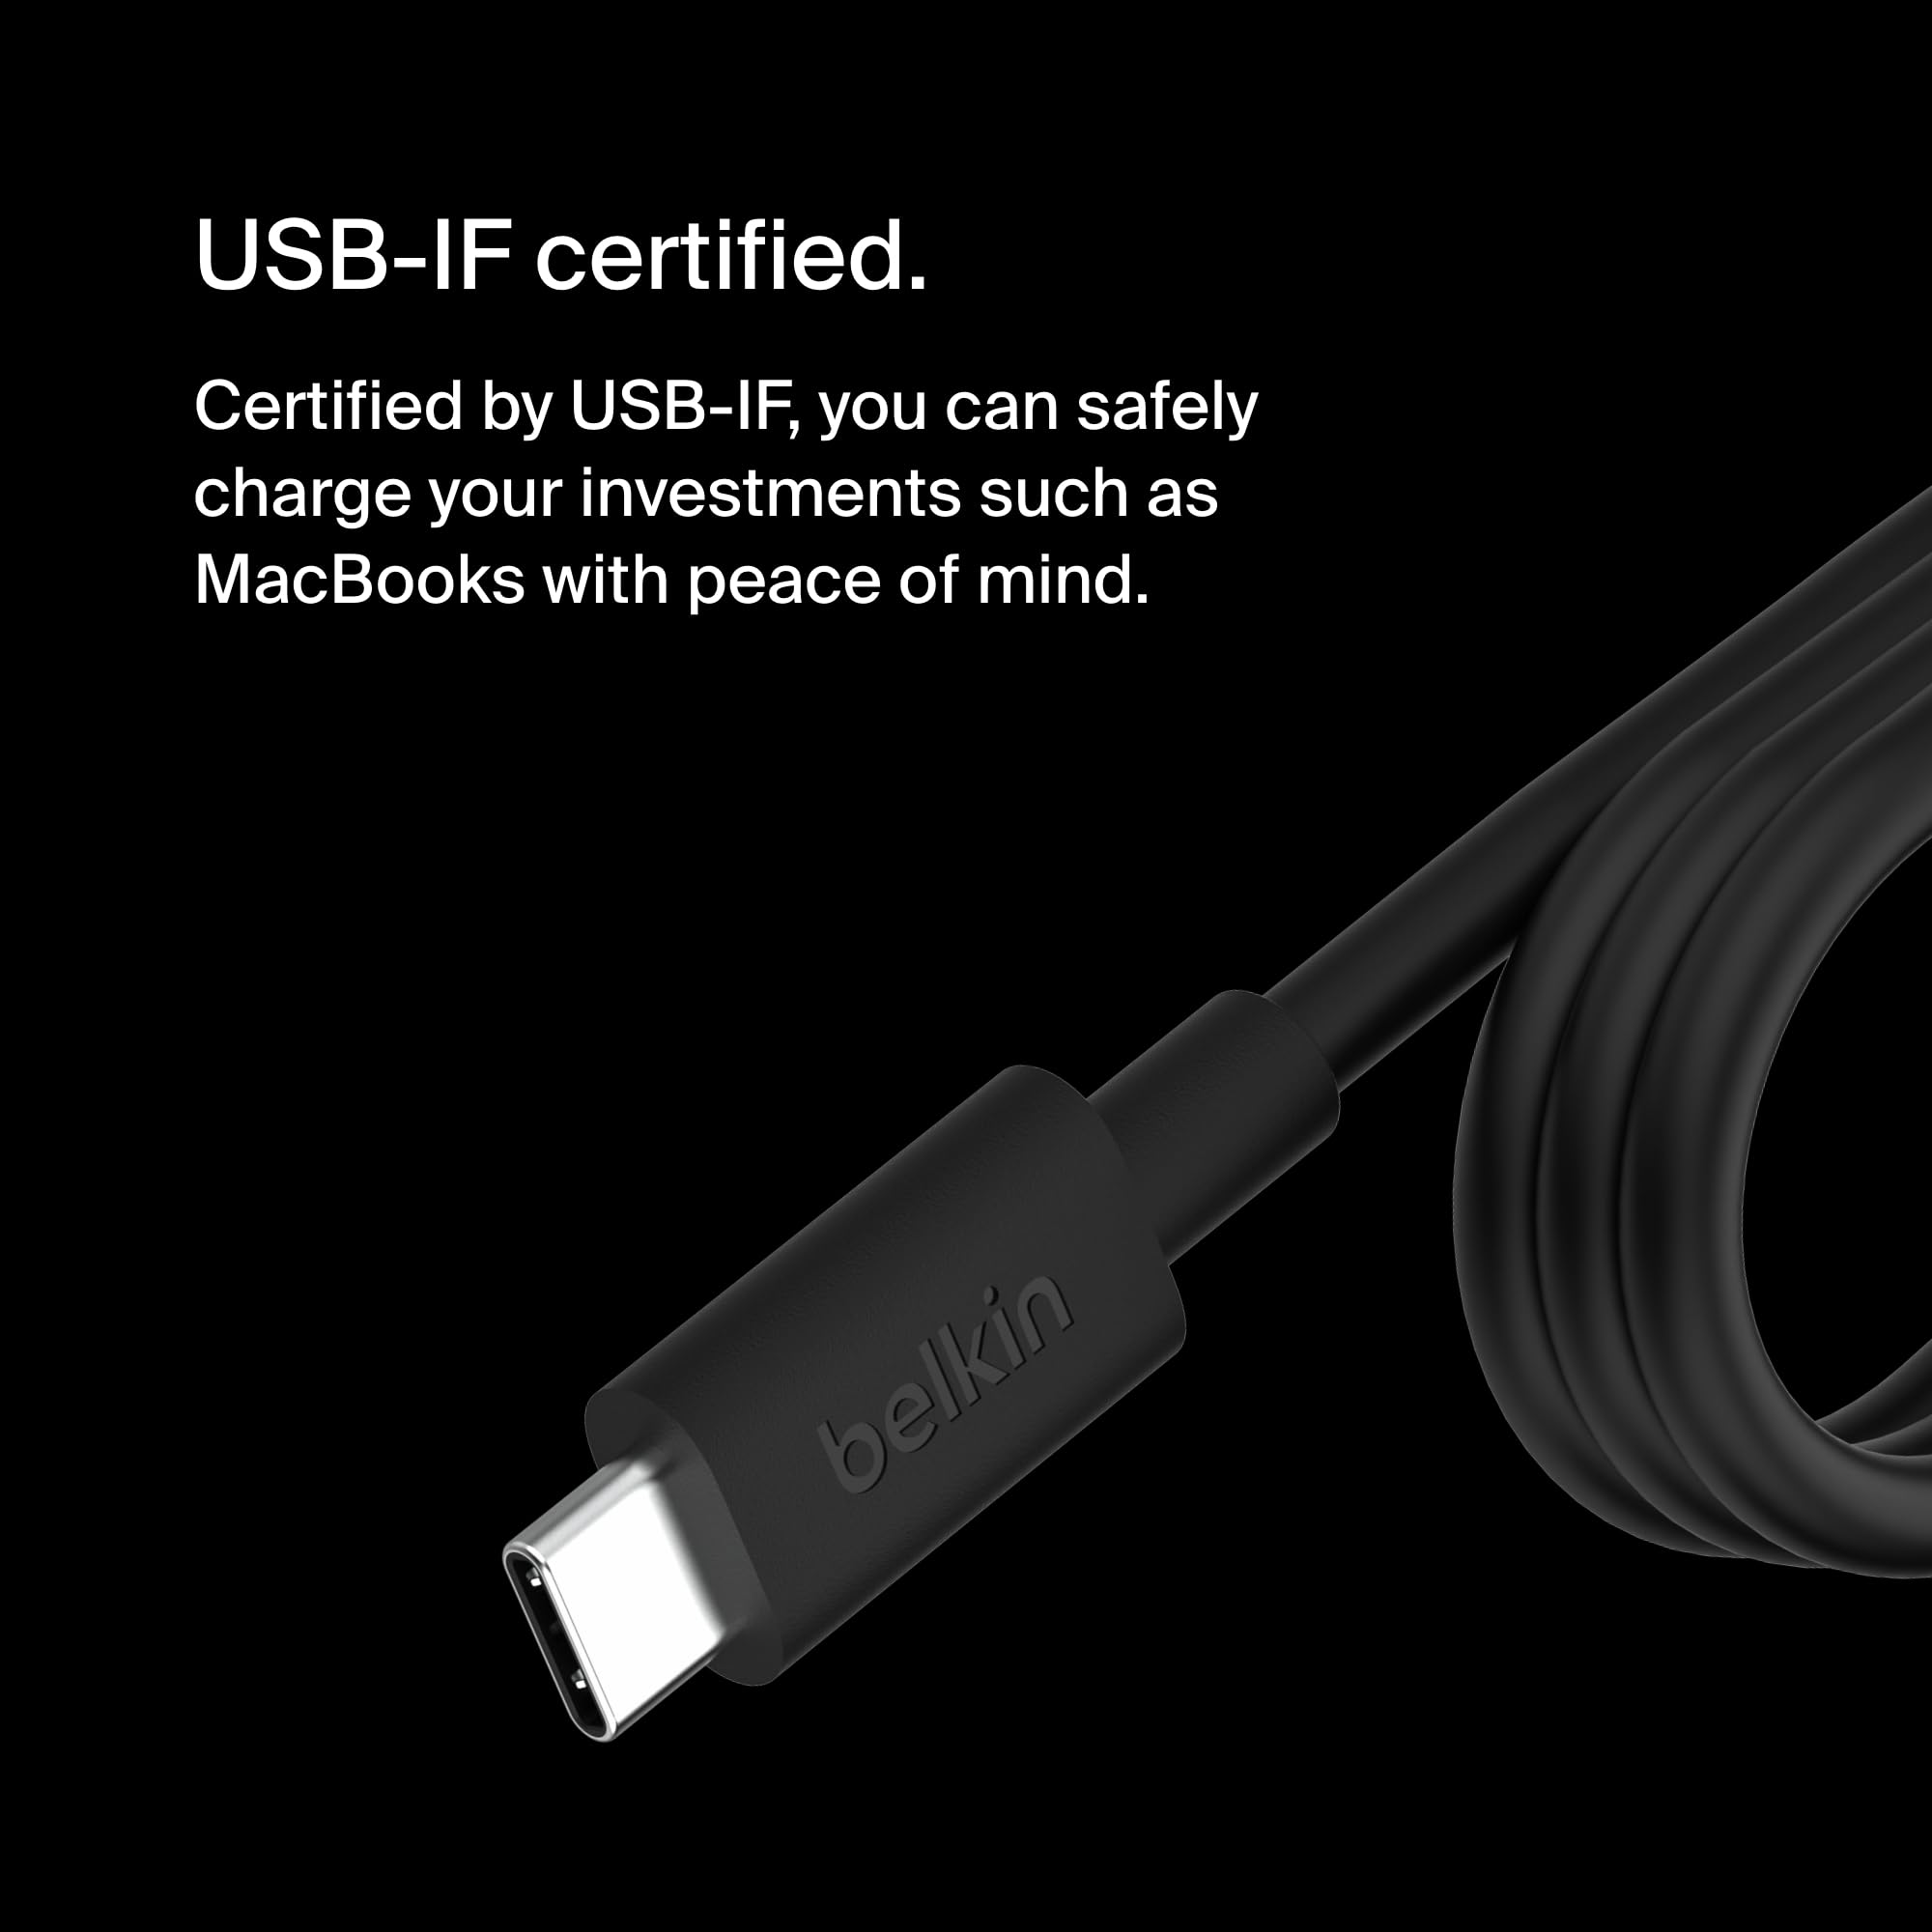 Belkin Connect 100W USB-C Core GaN Power Adapter, Fast-Charging Adapter w/Universal USB-C Compatibility, 100W Power Delivery, 8ft Power Cable for Gaming, MacBook Pro, PC Laptops, and Chromebook